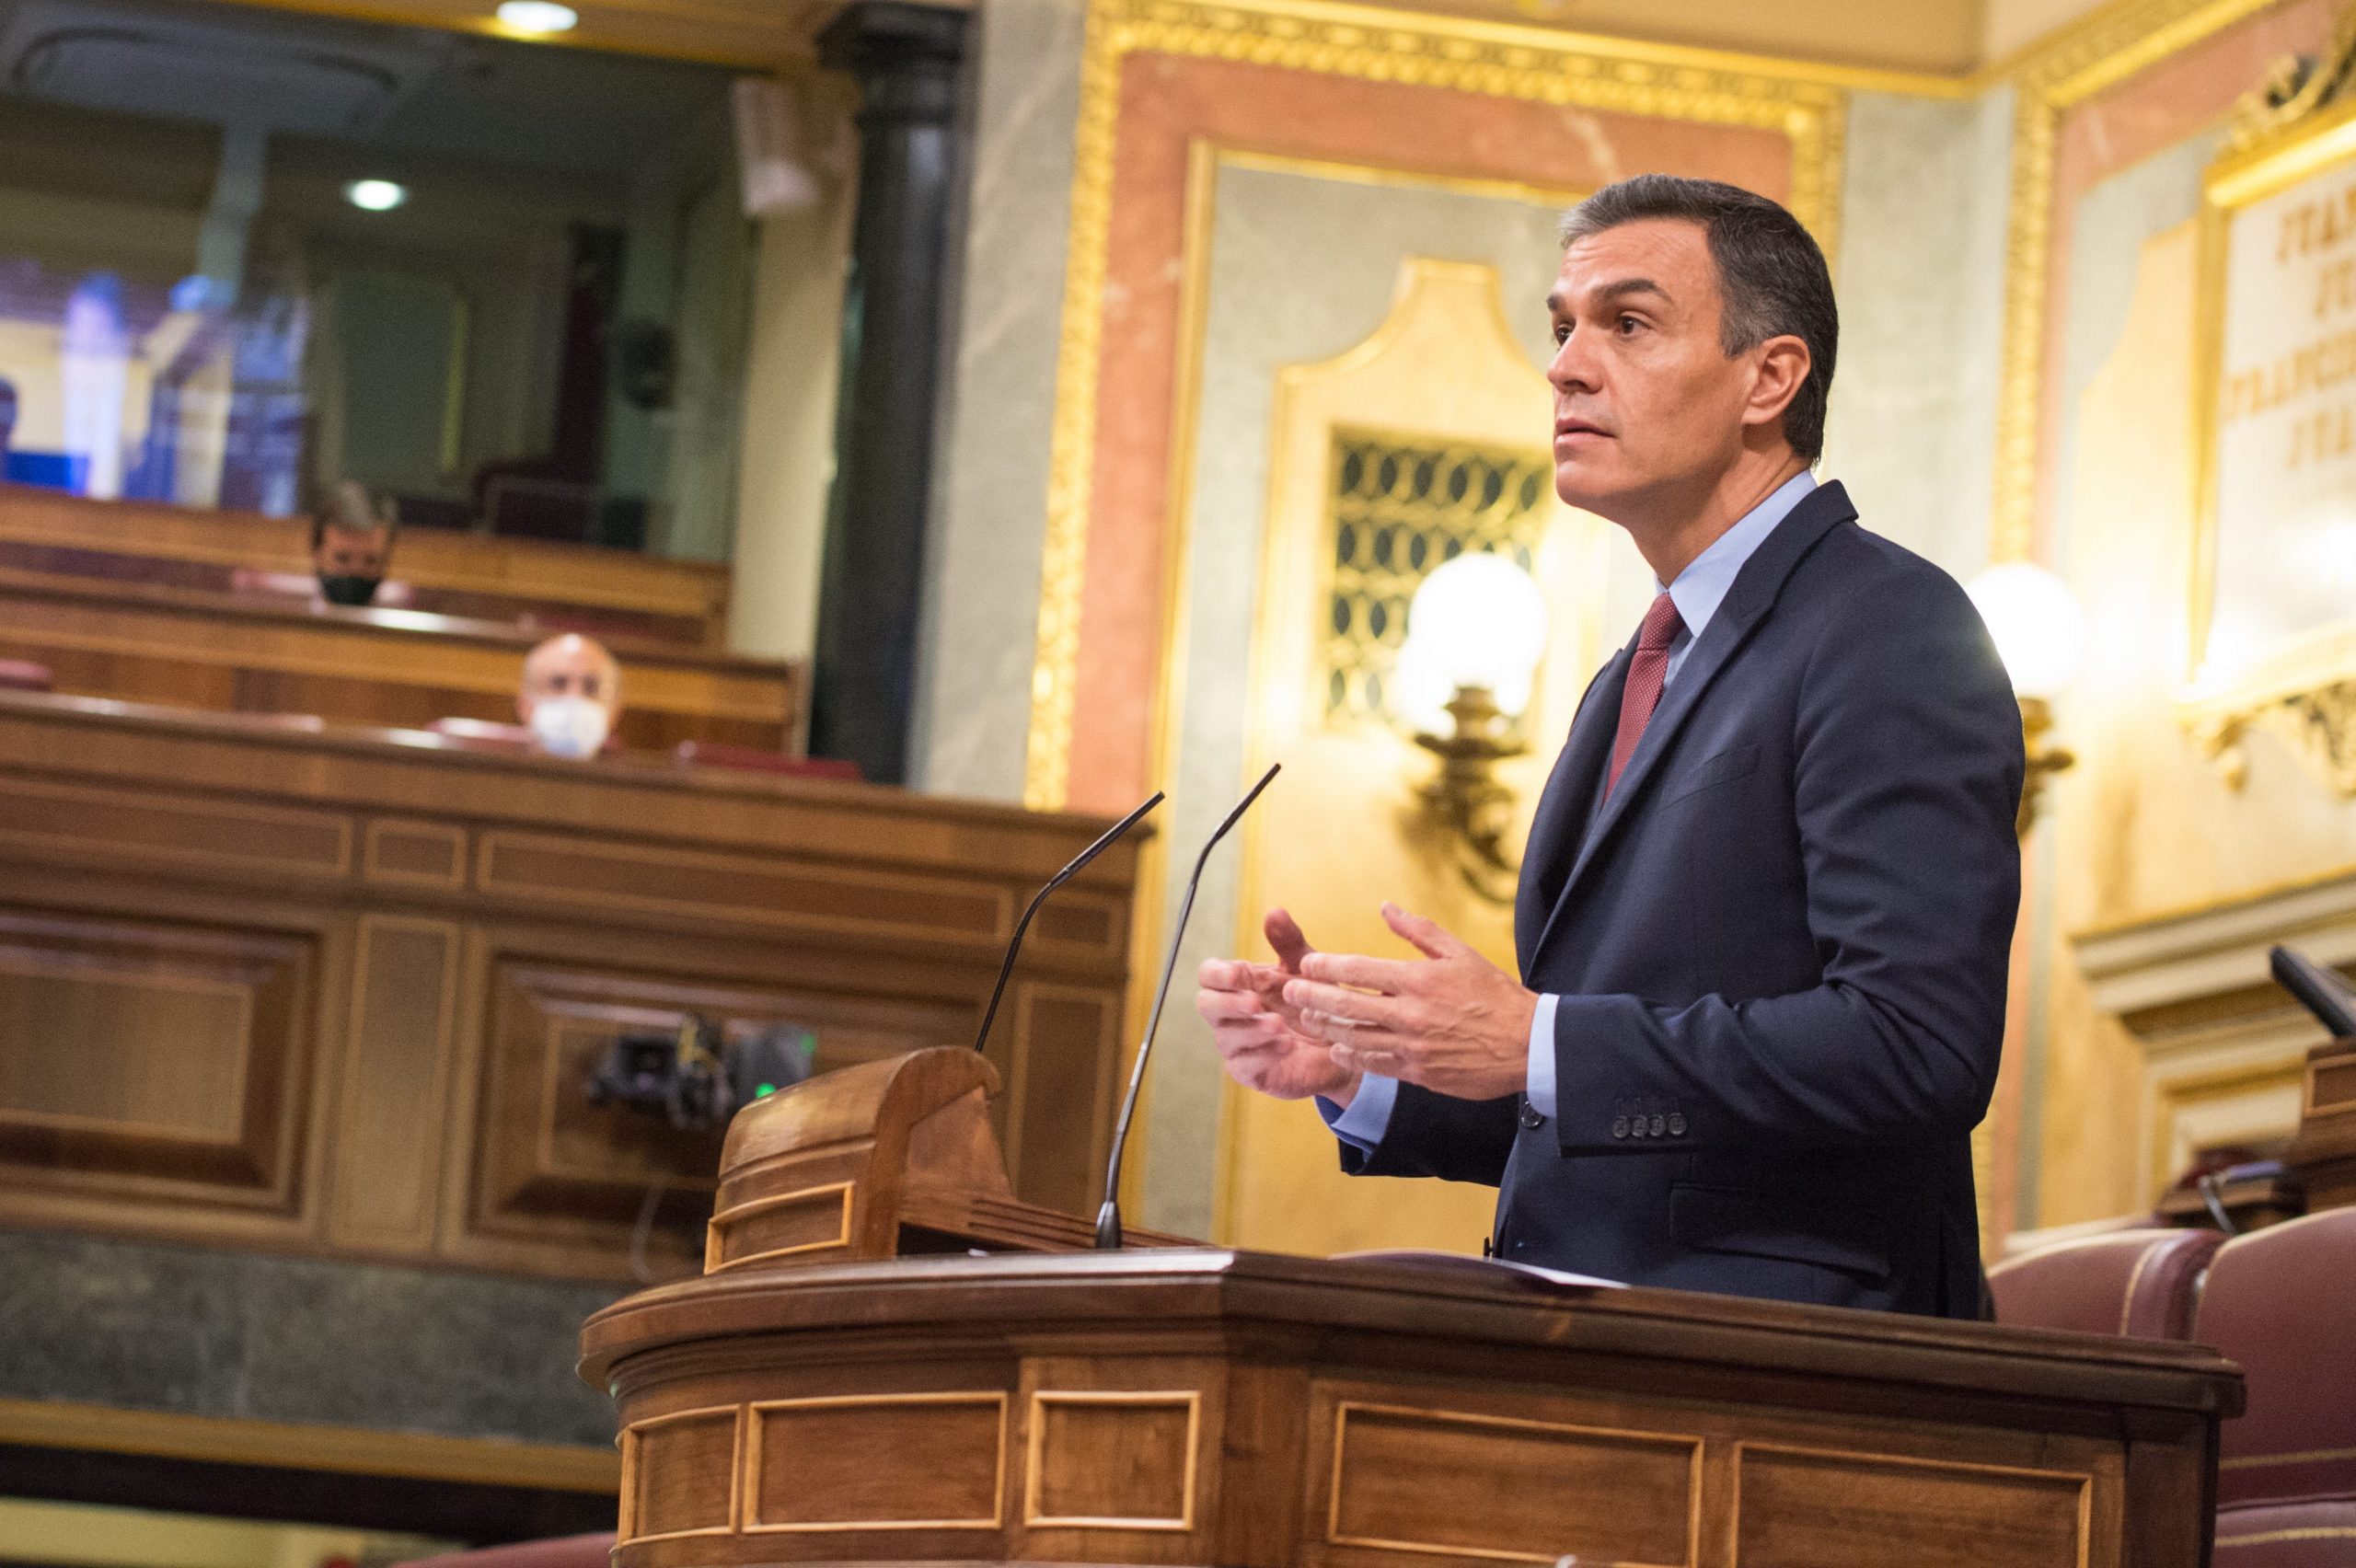 Pedro Sanchez announces windfall and temporary taxes on banks and energy companies in Spain